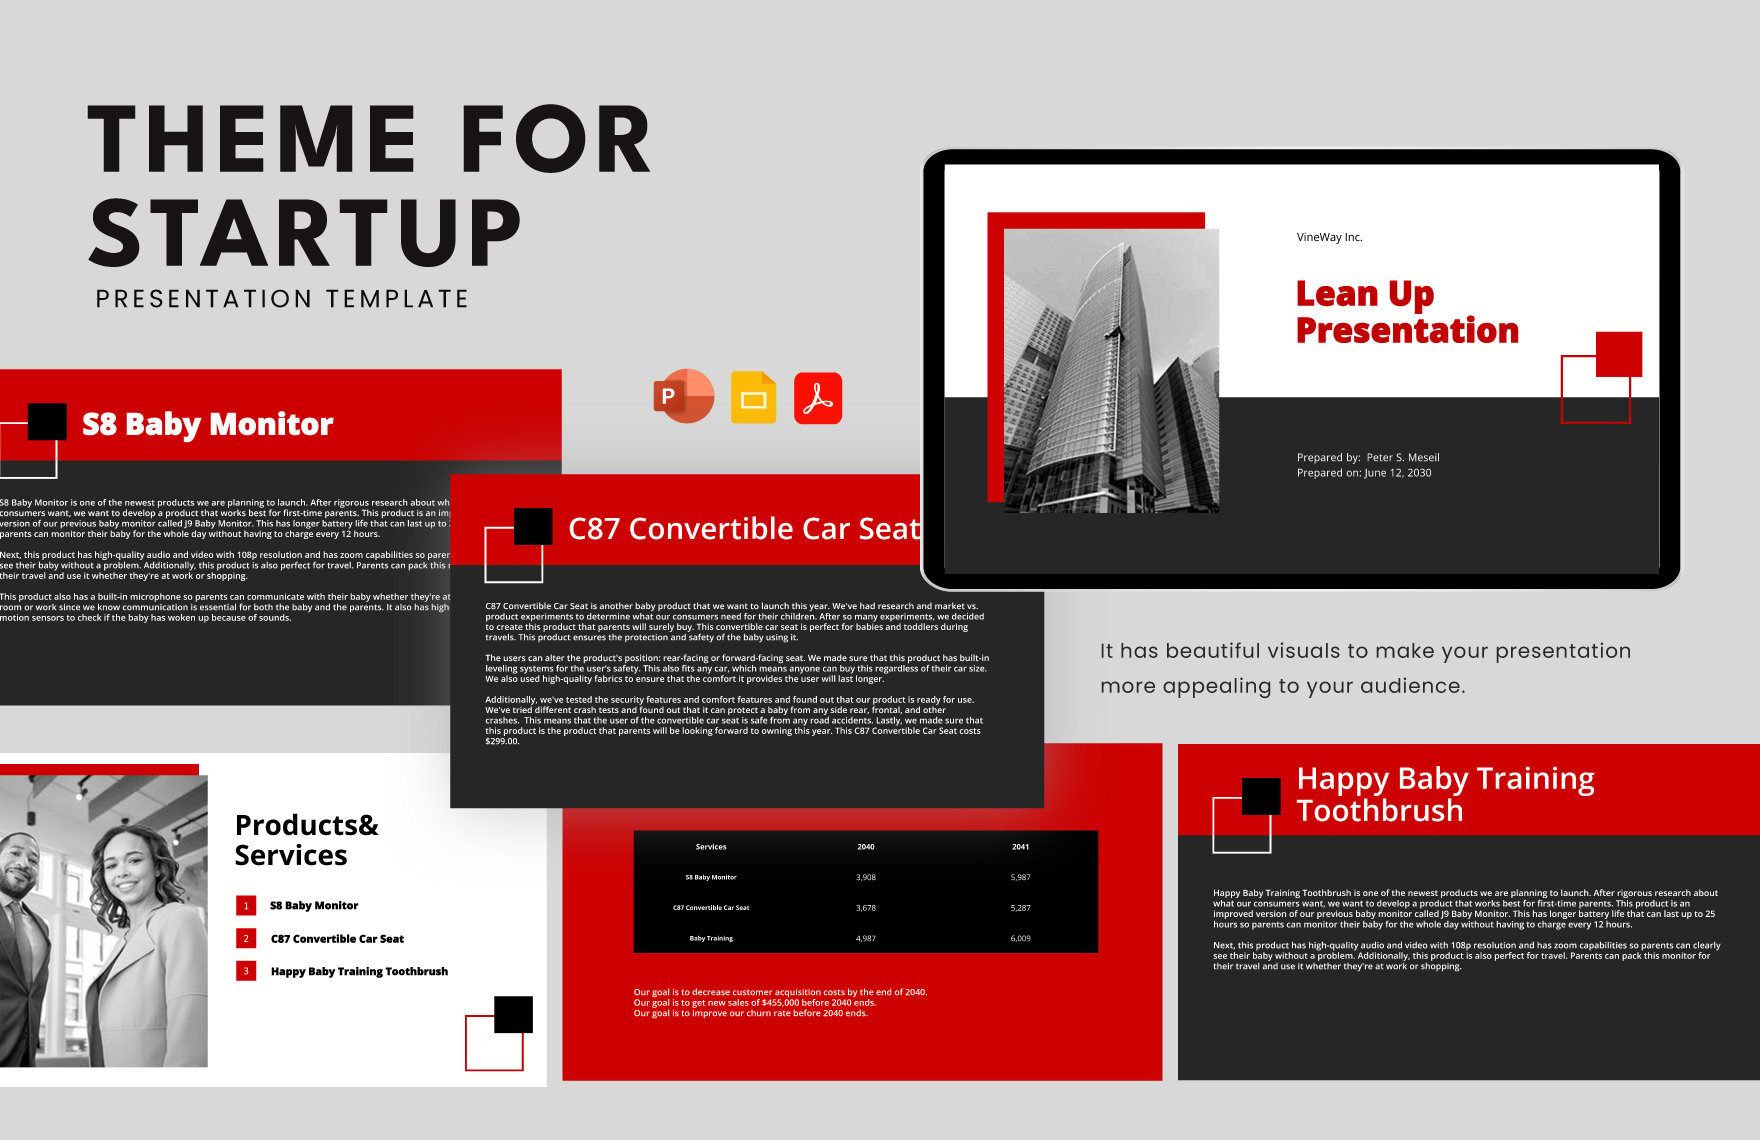 Theme for Startup Template